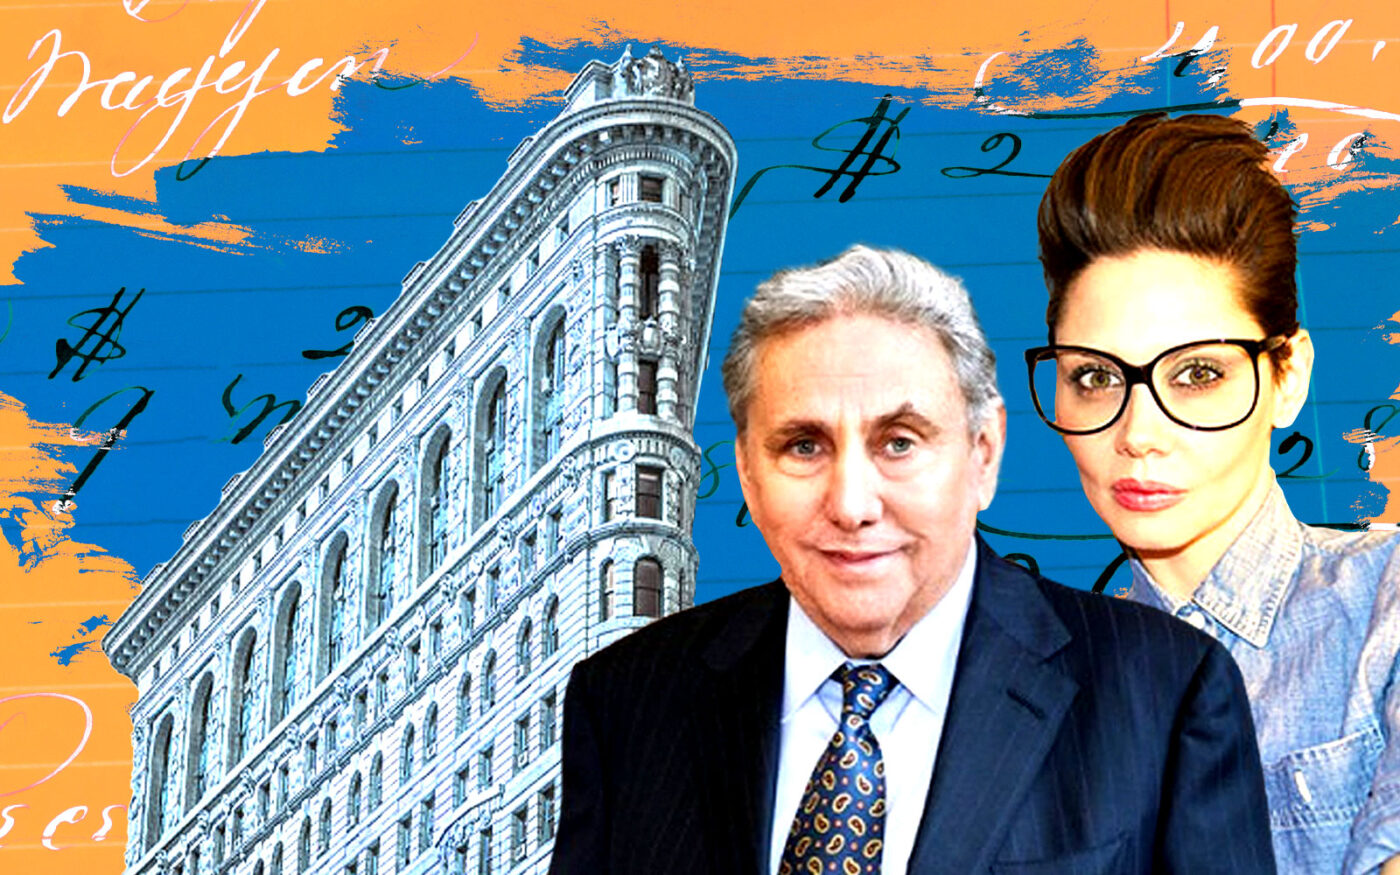 From left: GFP Real Estate's Jeff Gural and Sorgente Group's Veronica Mainetti with the Flatiron Building